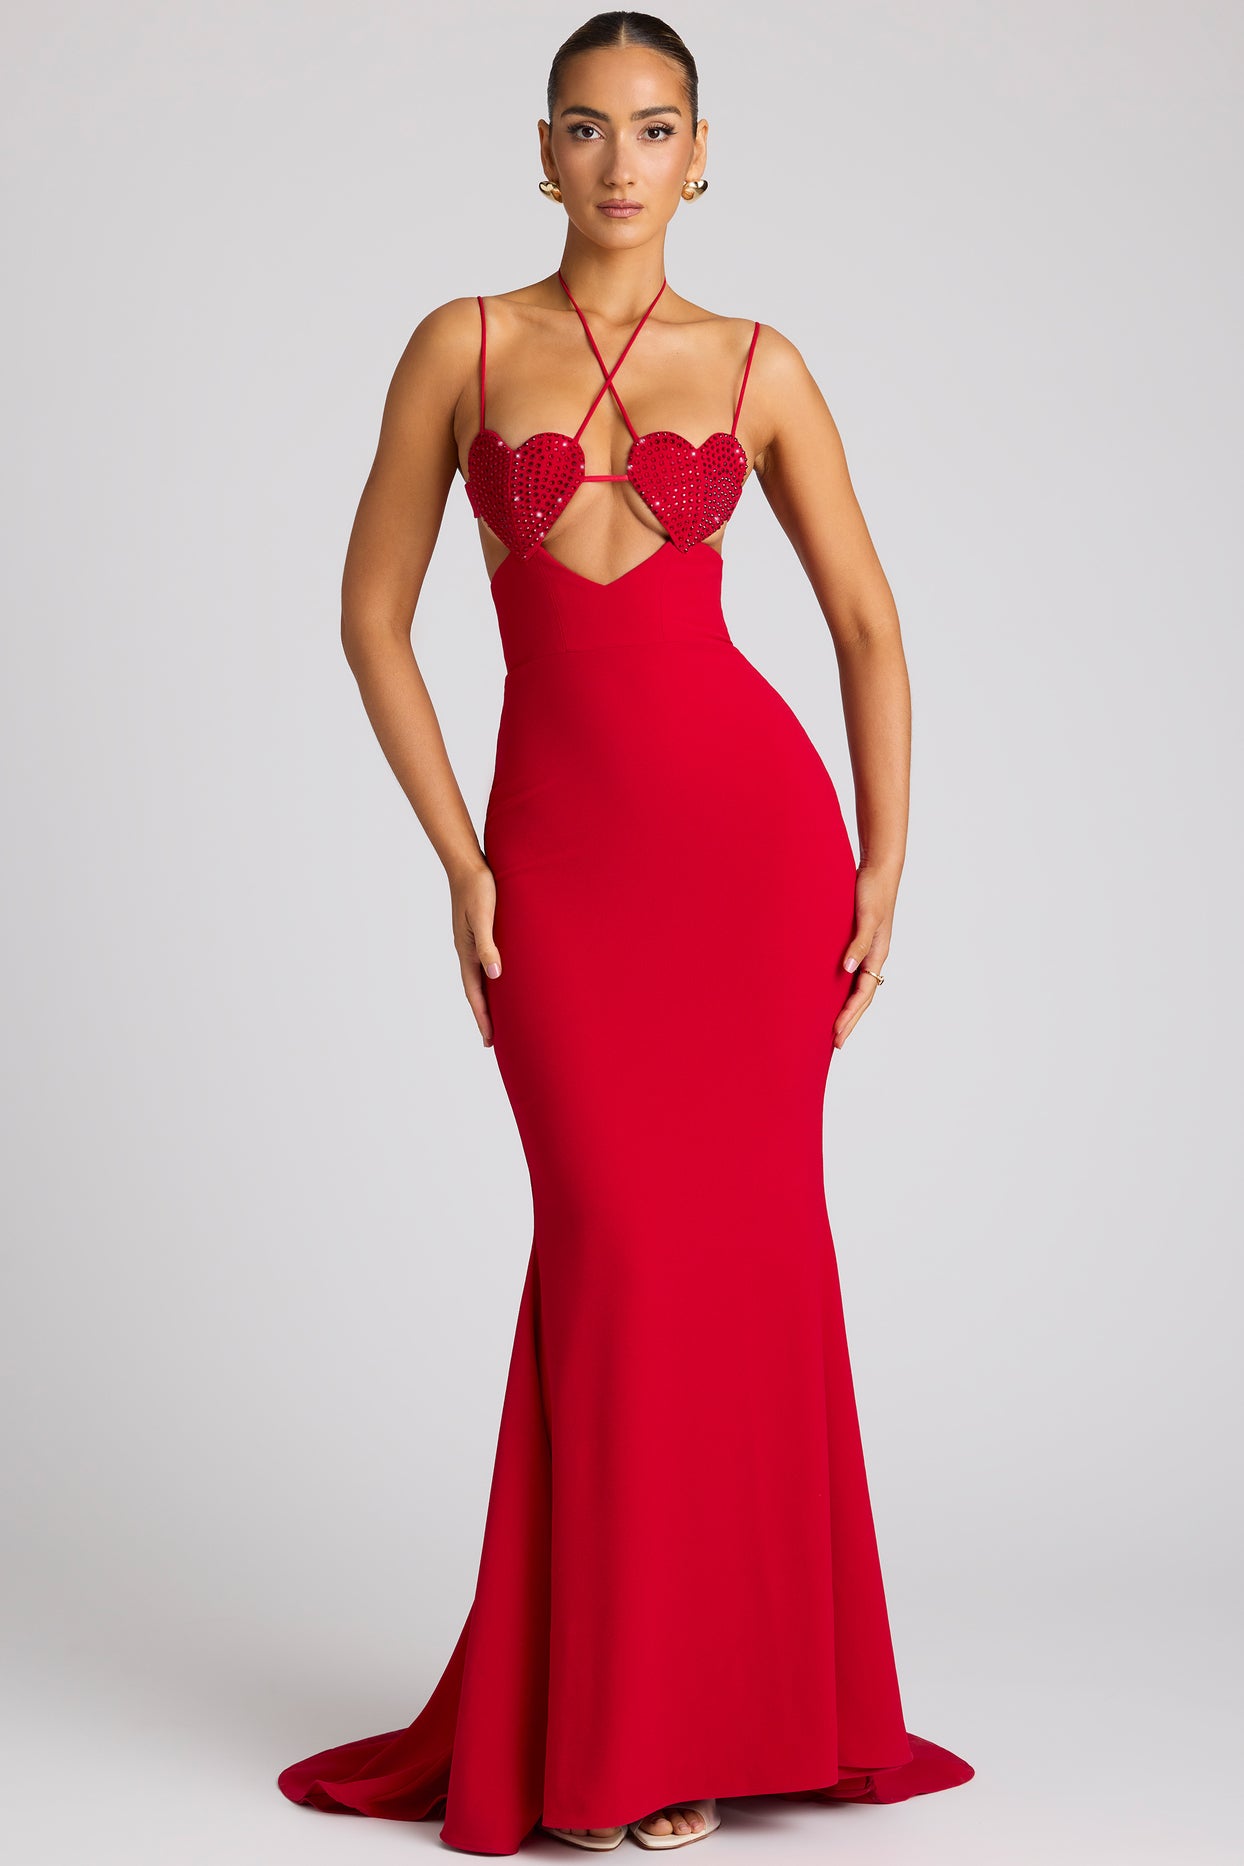 Embellished Heart Cup Detail Evening Gown in Fire Red